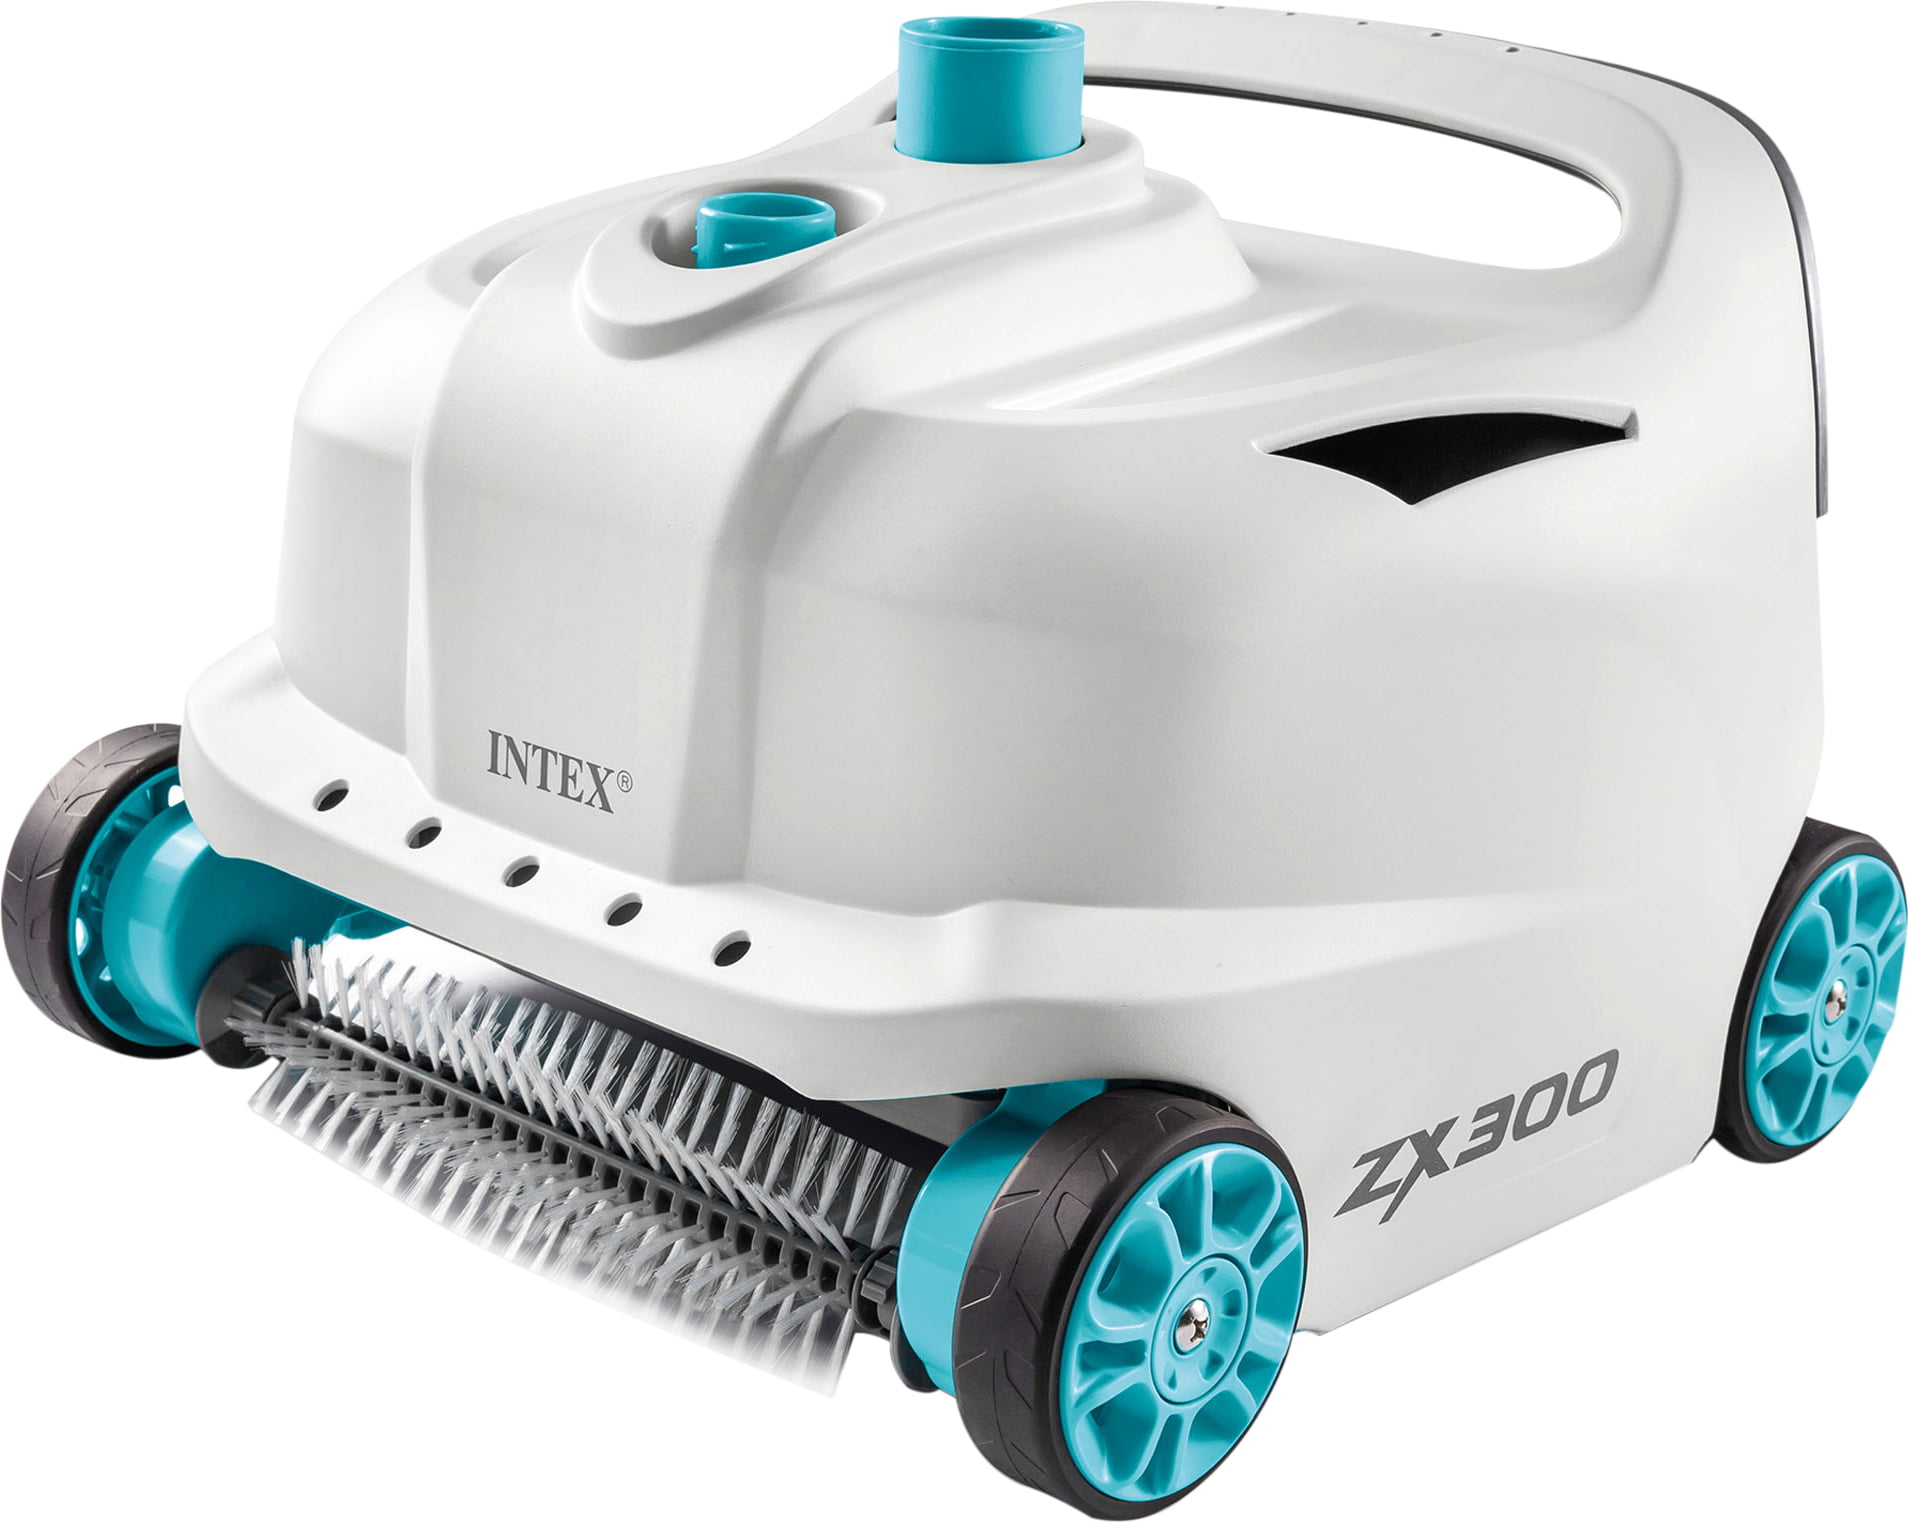 Intex Deluxe Auto Pool Cleaner ZX300 - 1 pcs